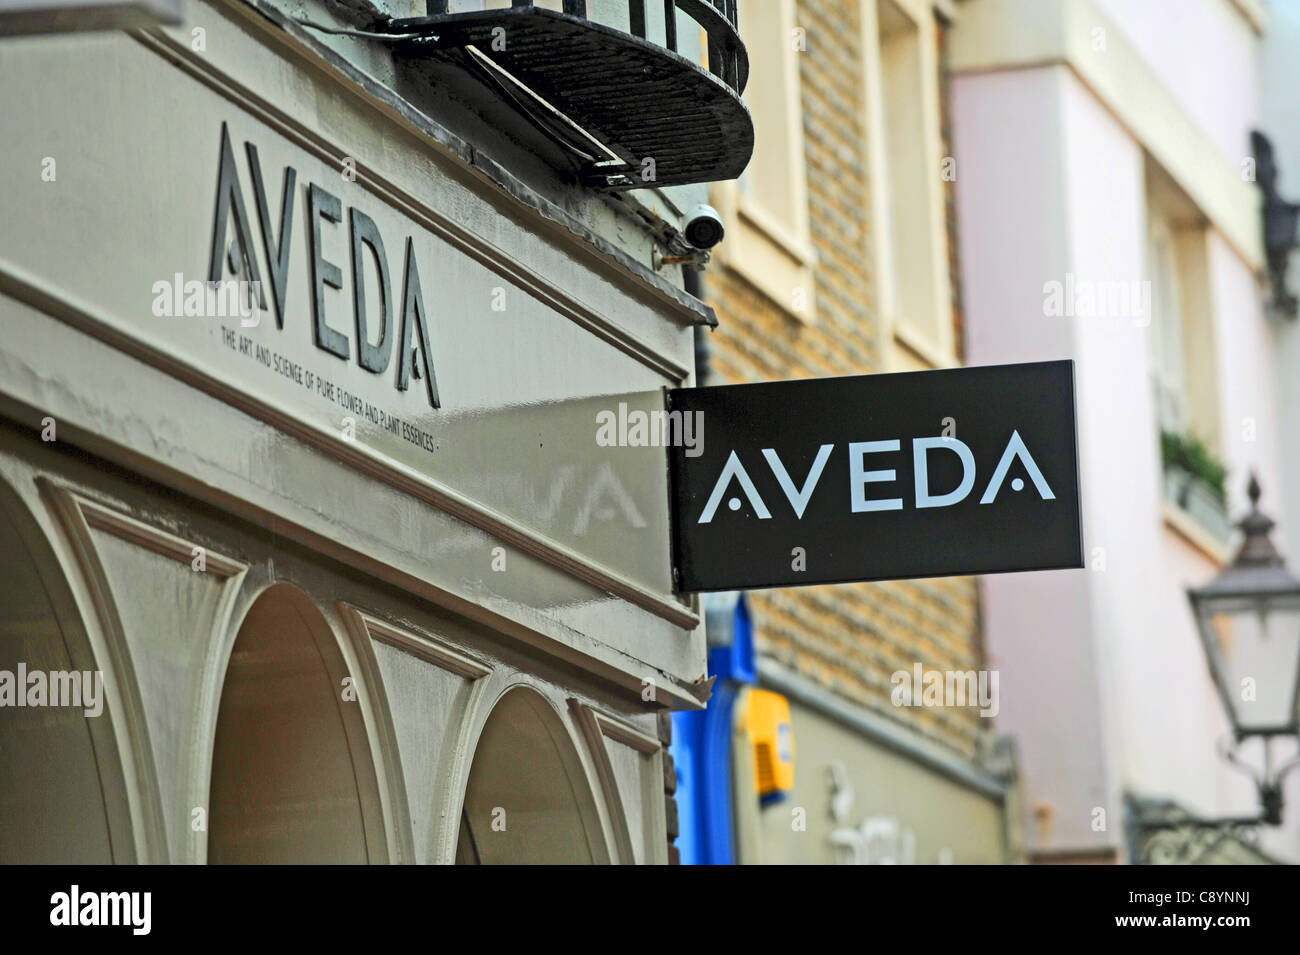 Aveda naturally made hair and beauty salon product shop in Brighton UK Photograph taken October 2011 Stock Photo